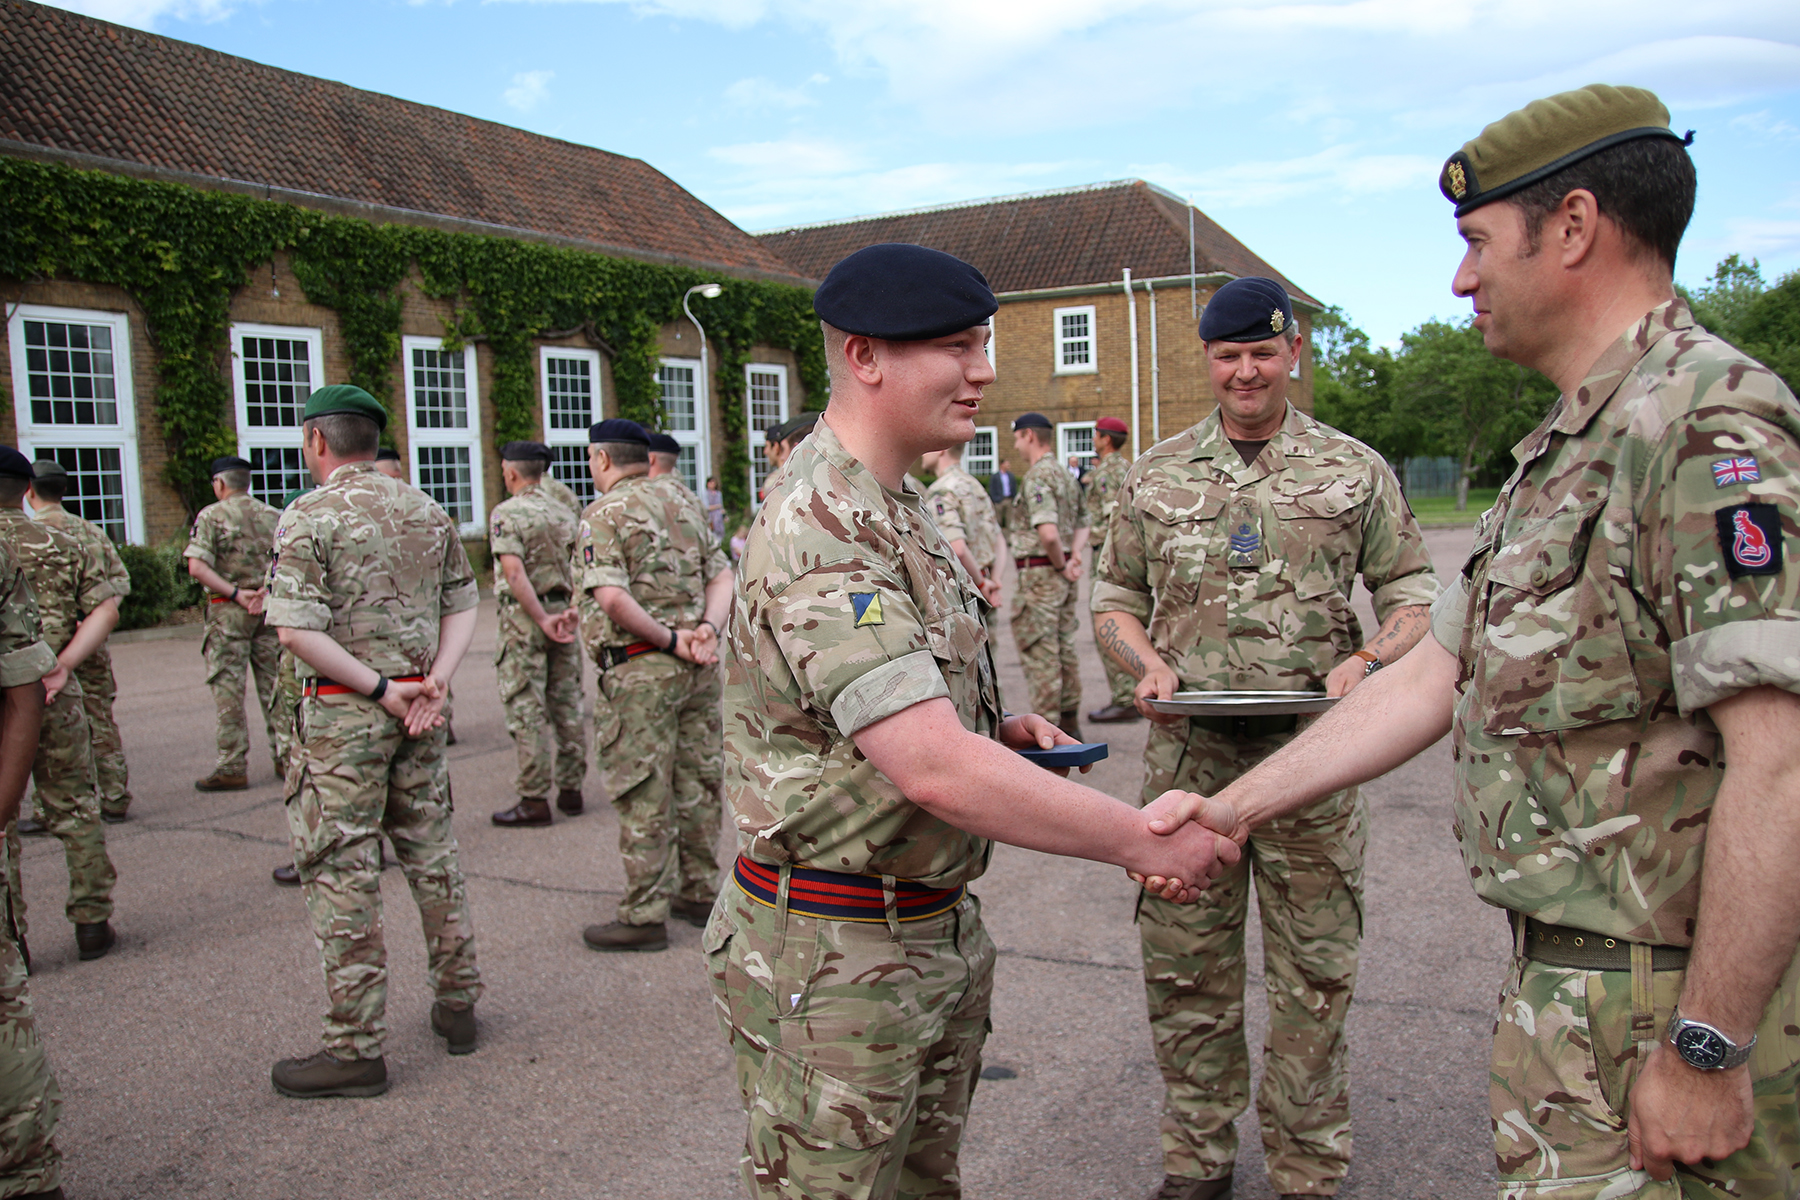 Private Arron Walker, who was the most junior soldier on parade presents the Commander of 7th Infantry Brigade, Brigadier Guy Foden, with his Platinum Jubilee Medal.